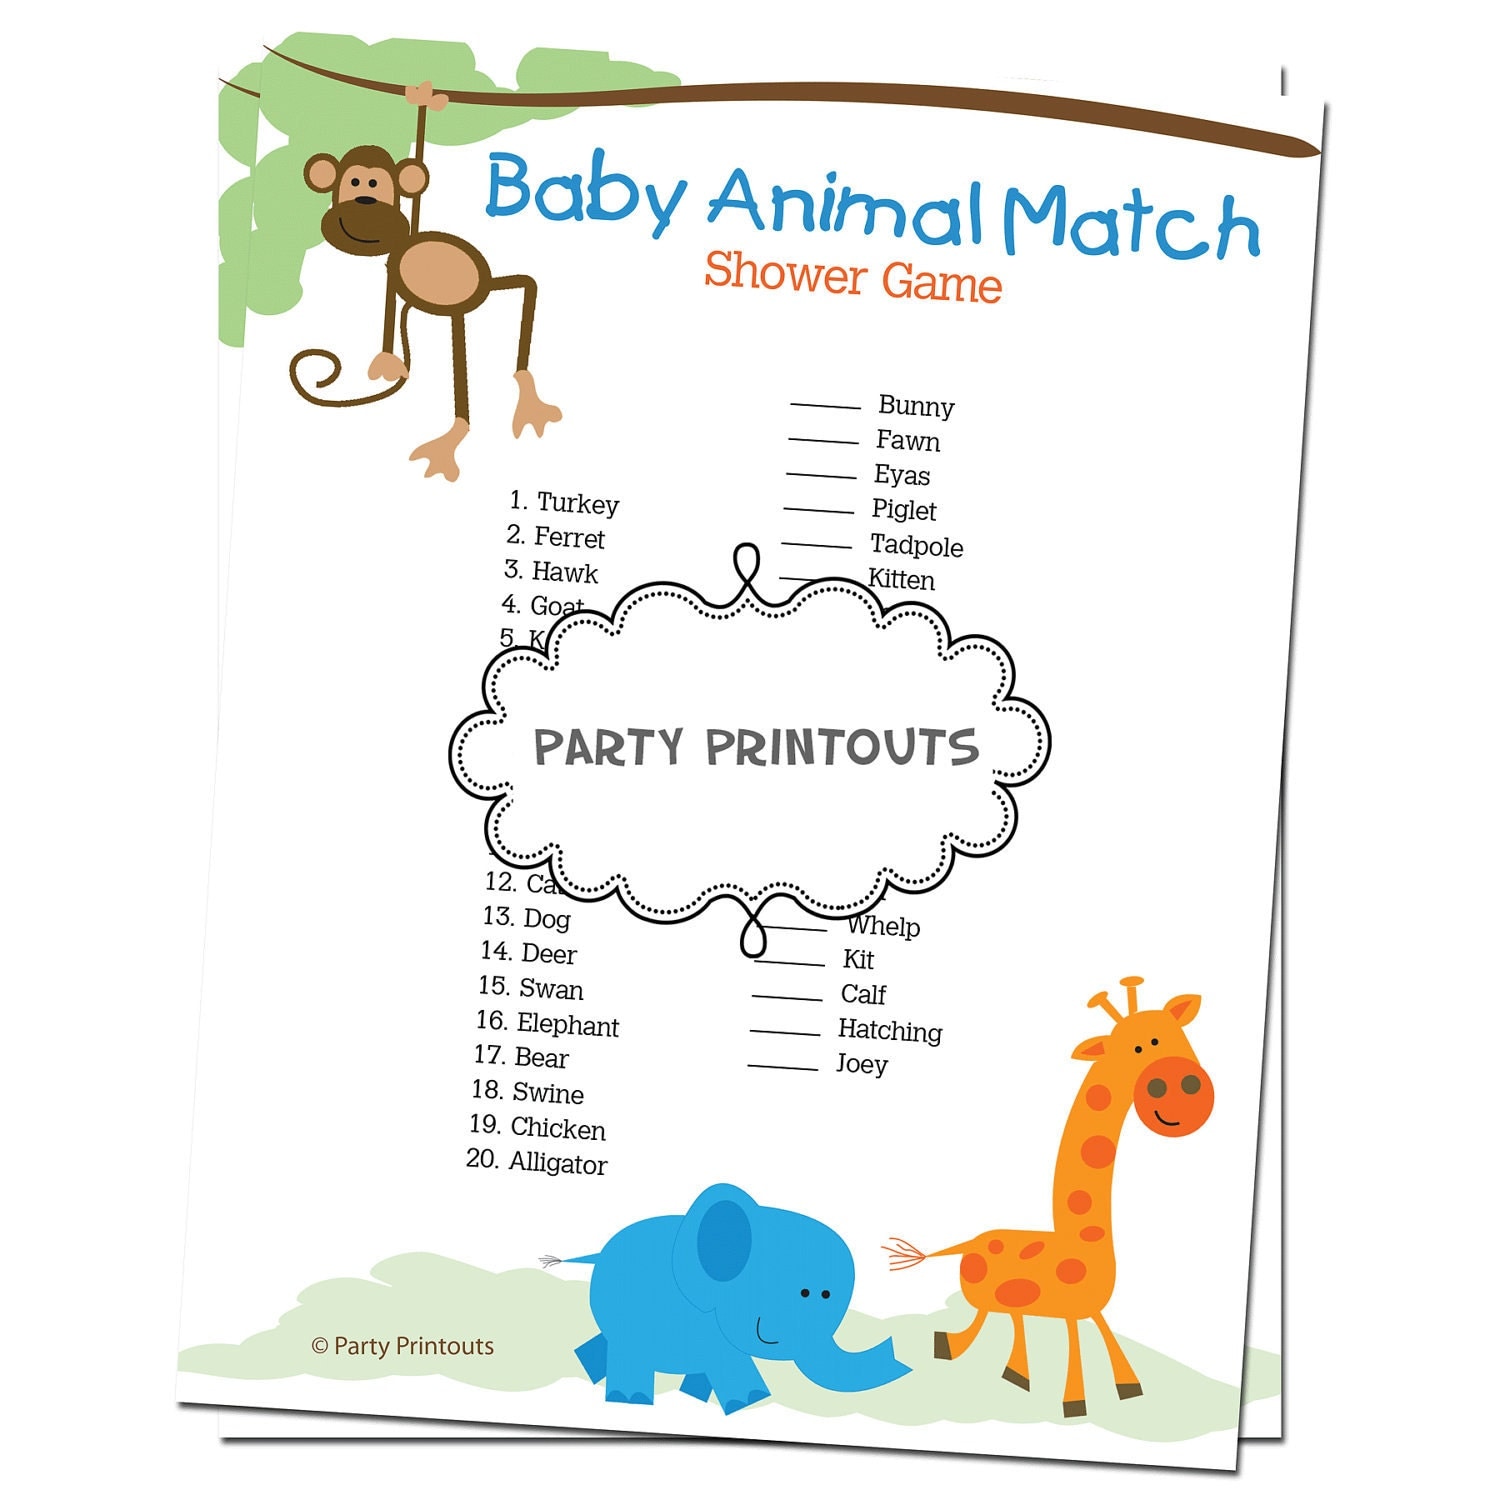 animal baby matching game without answers printable